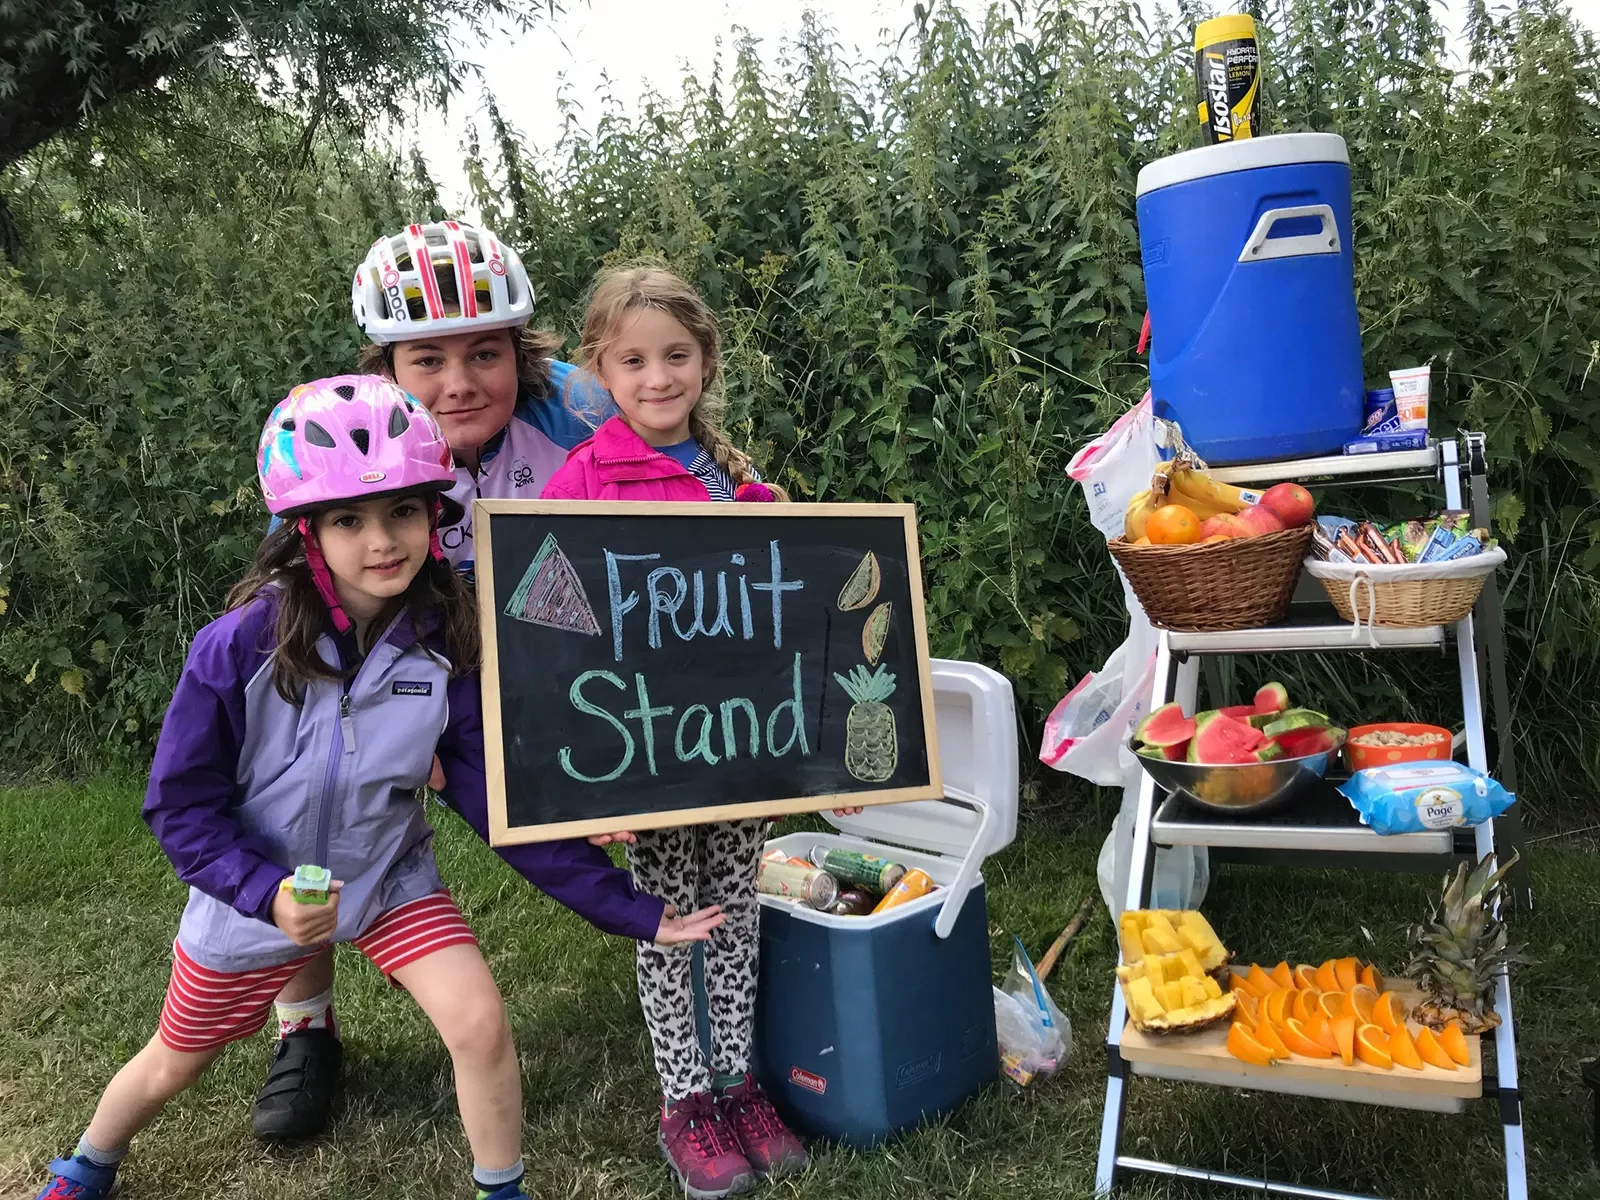 Kids posing at fruit stand snack table